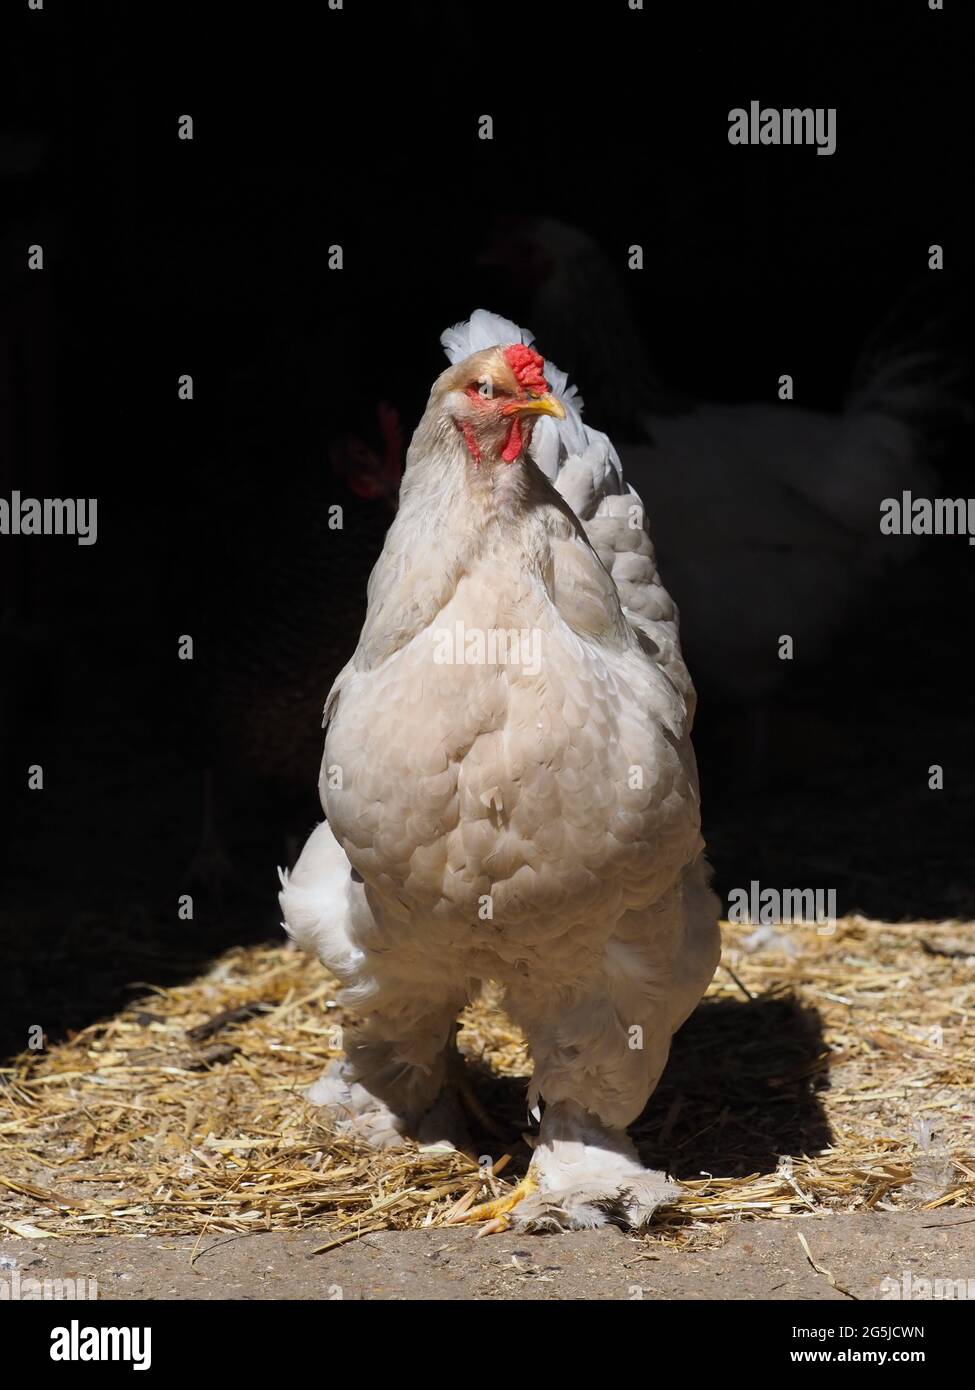 A rare breed cockeral against a black background. Stock Photo